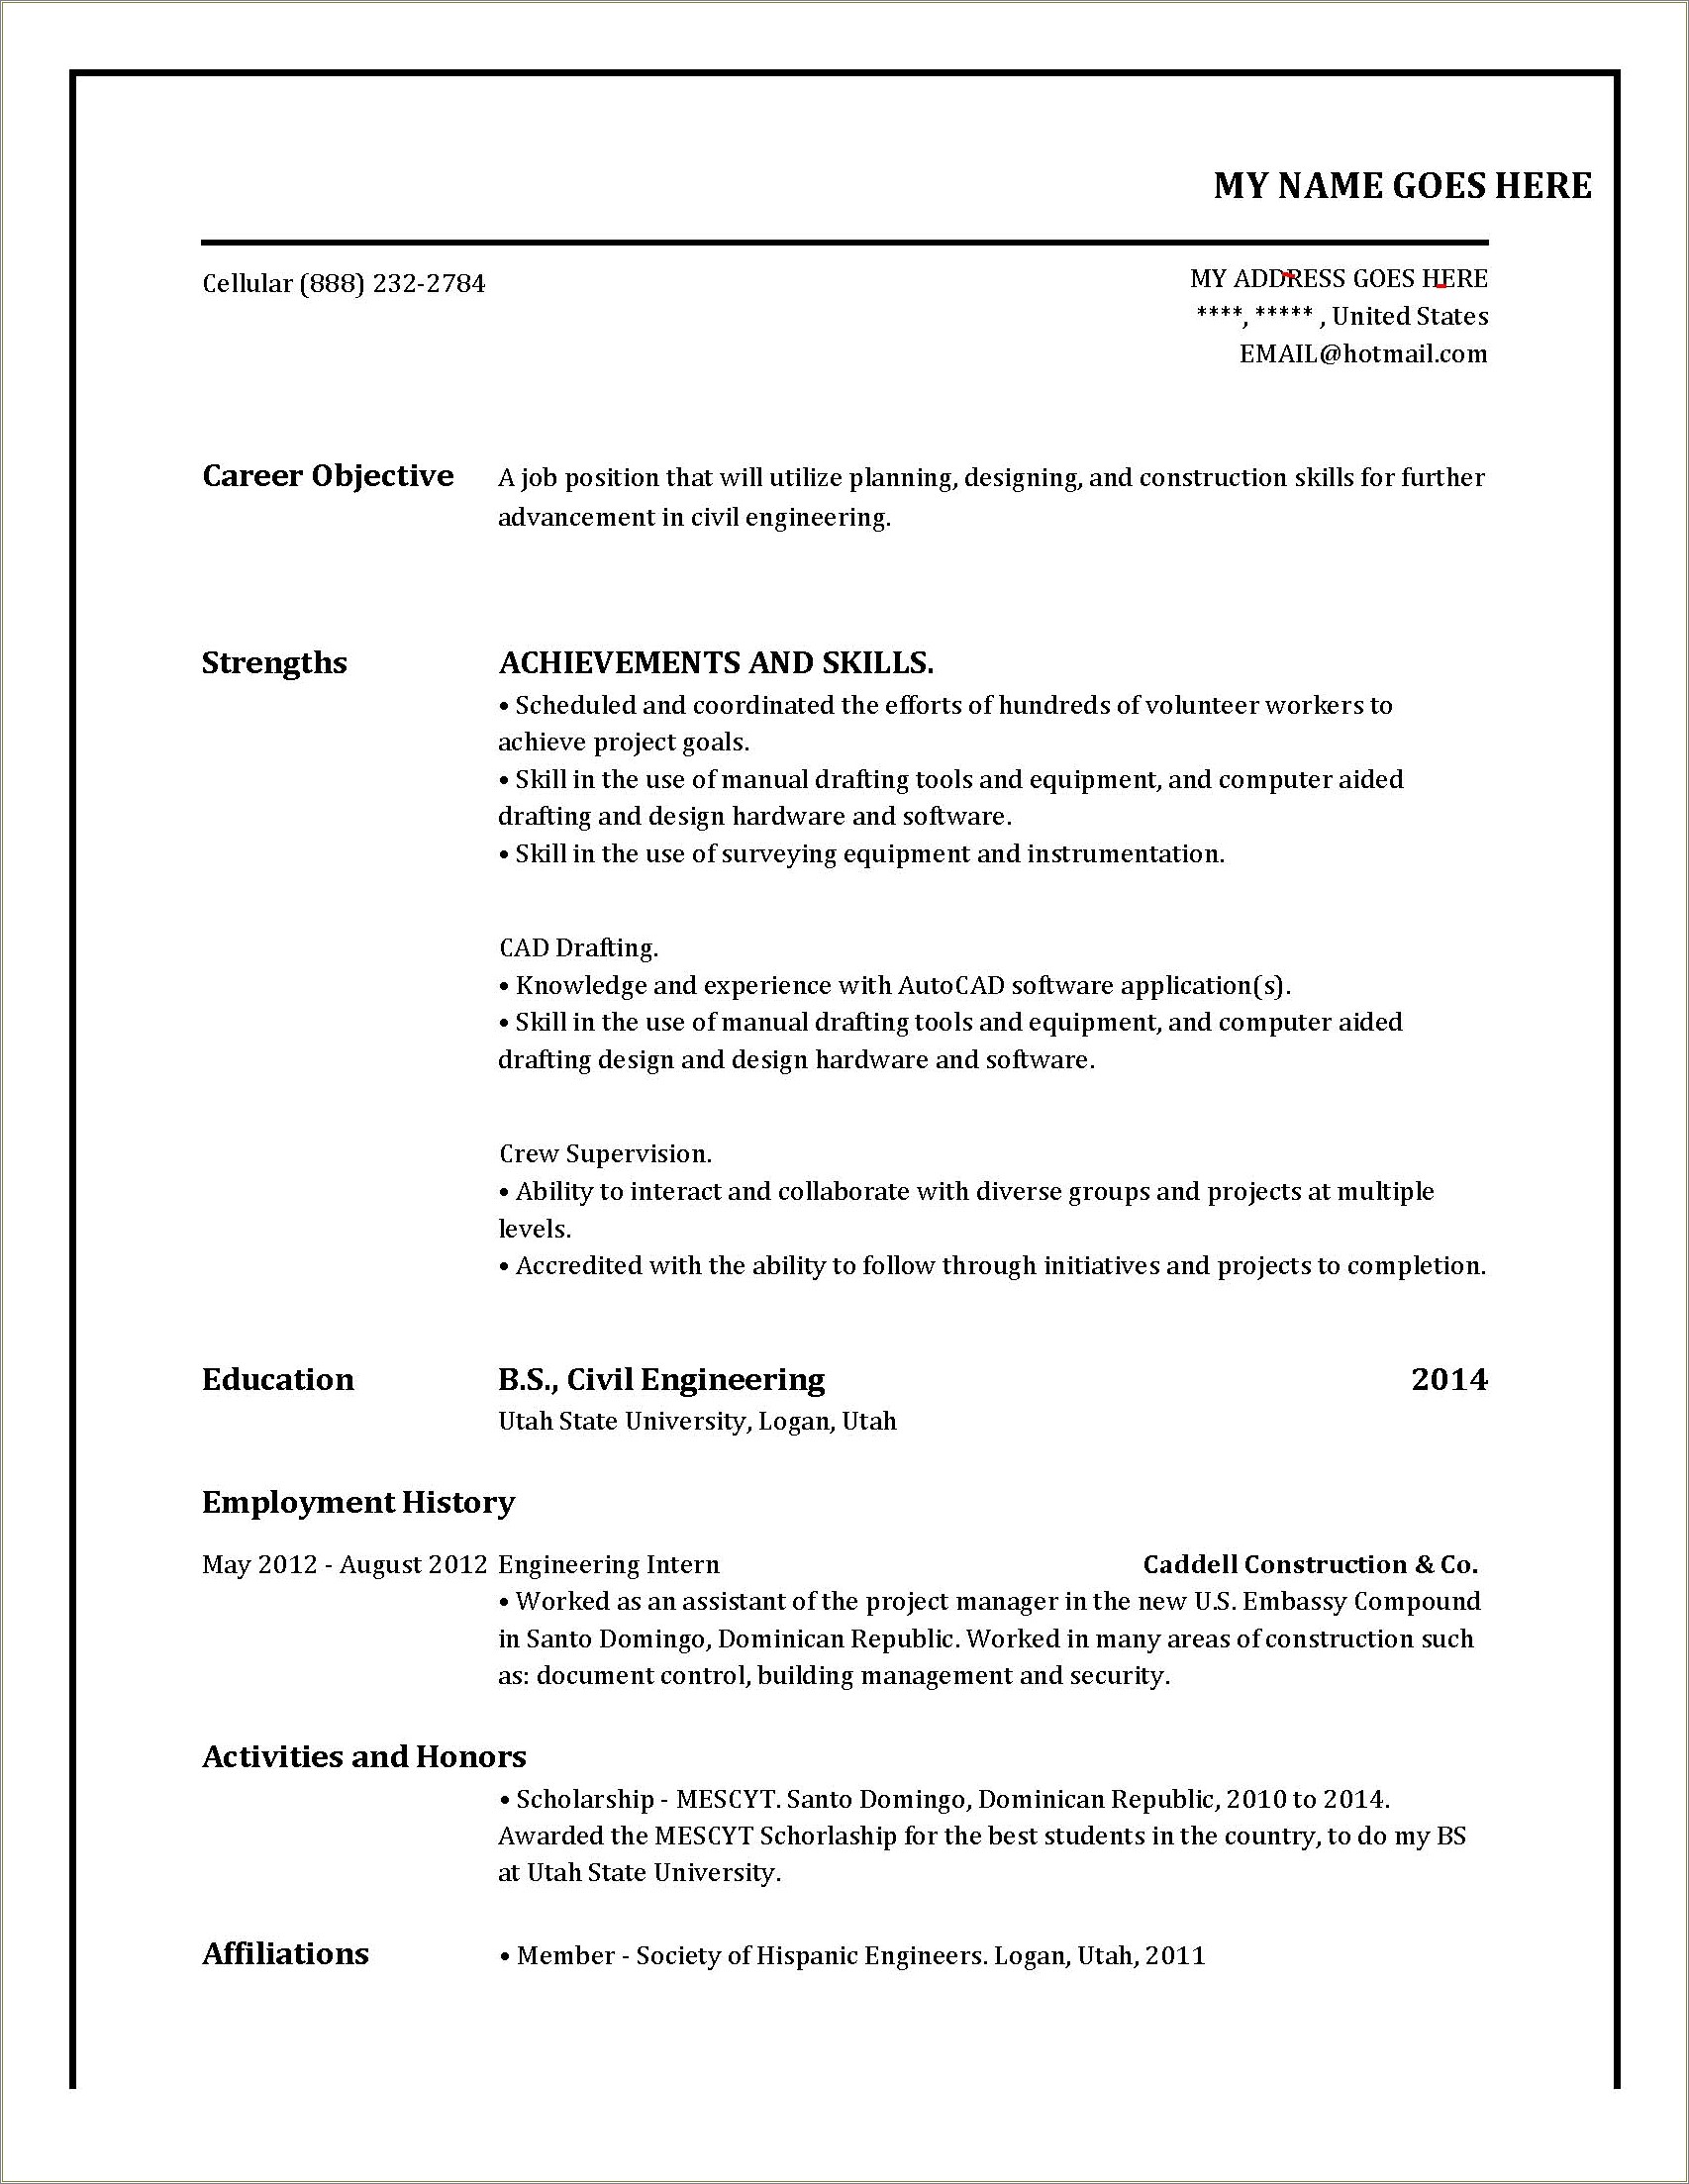 I Want To Make Best Resume